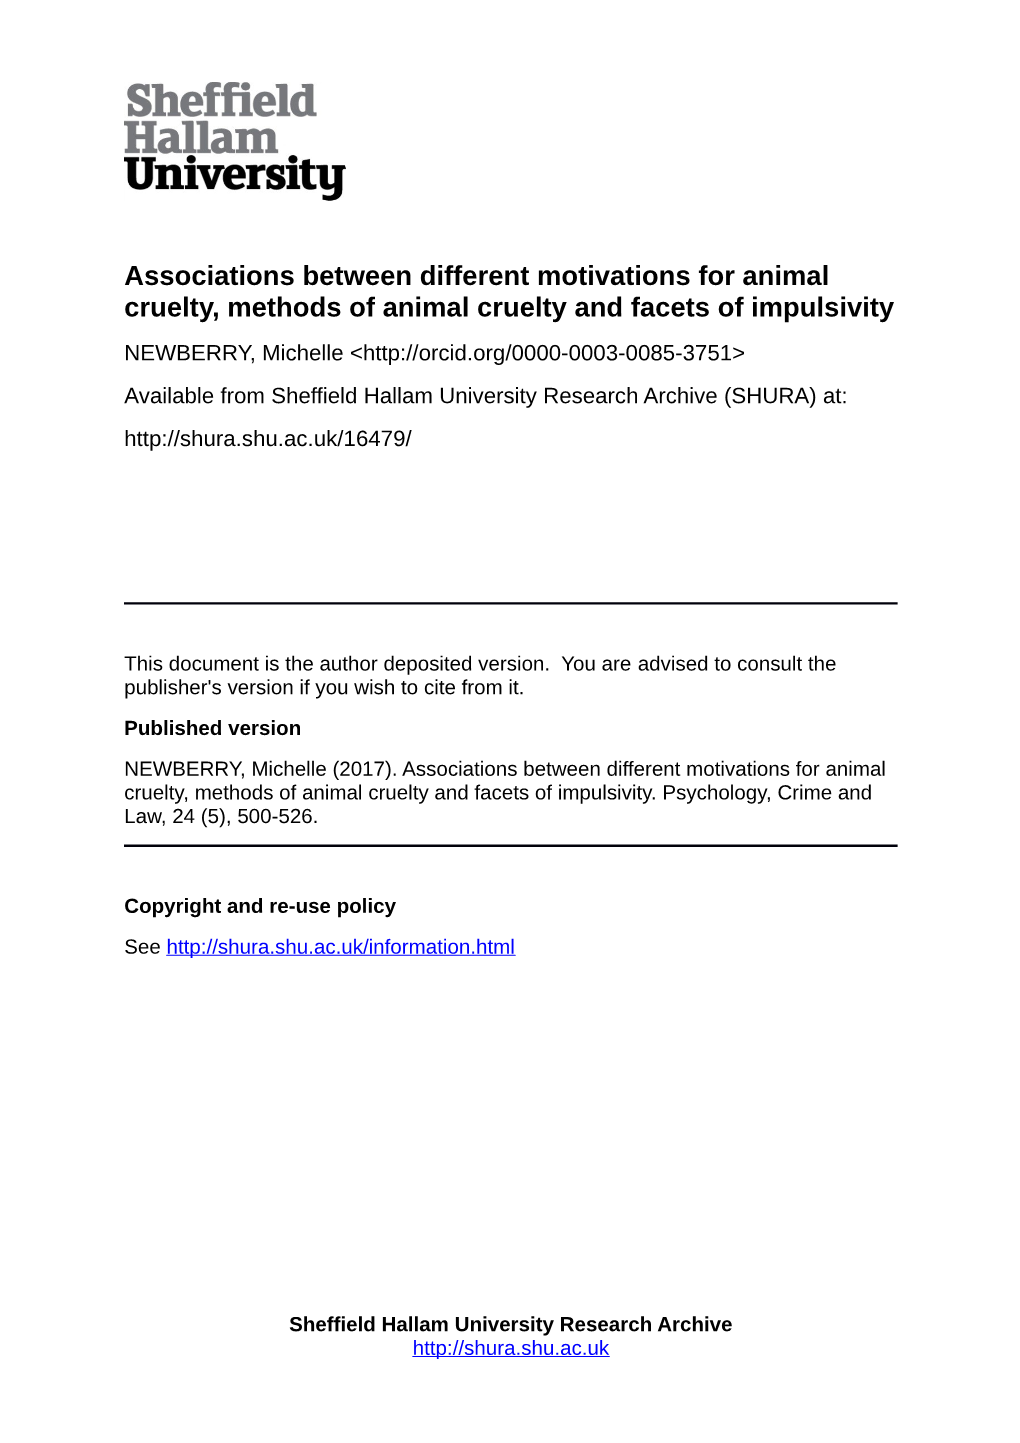 Associations Between Different Motivations for Animal Cruelty